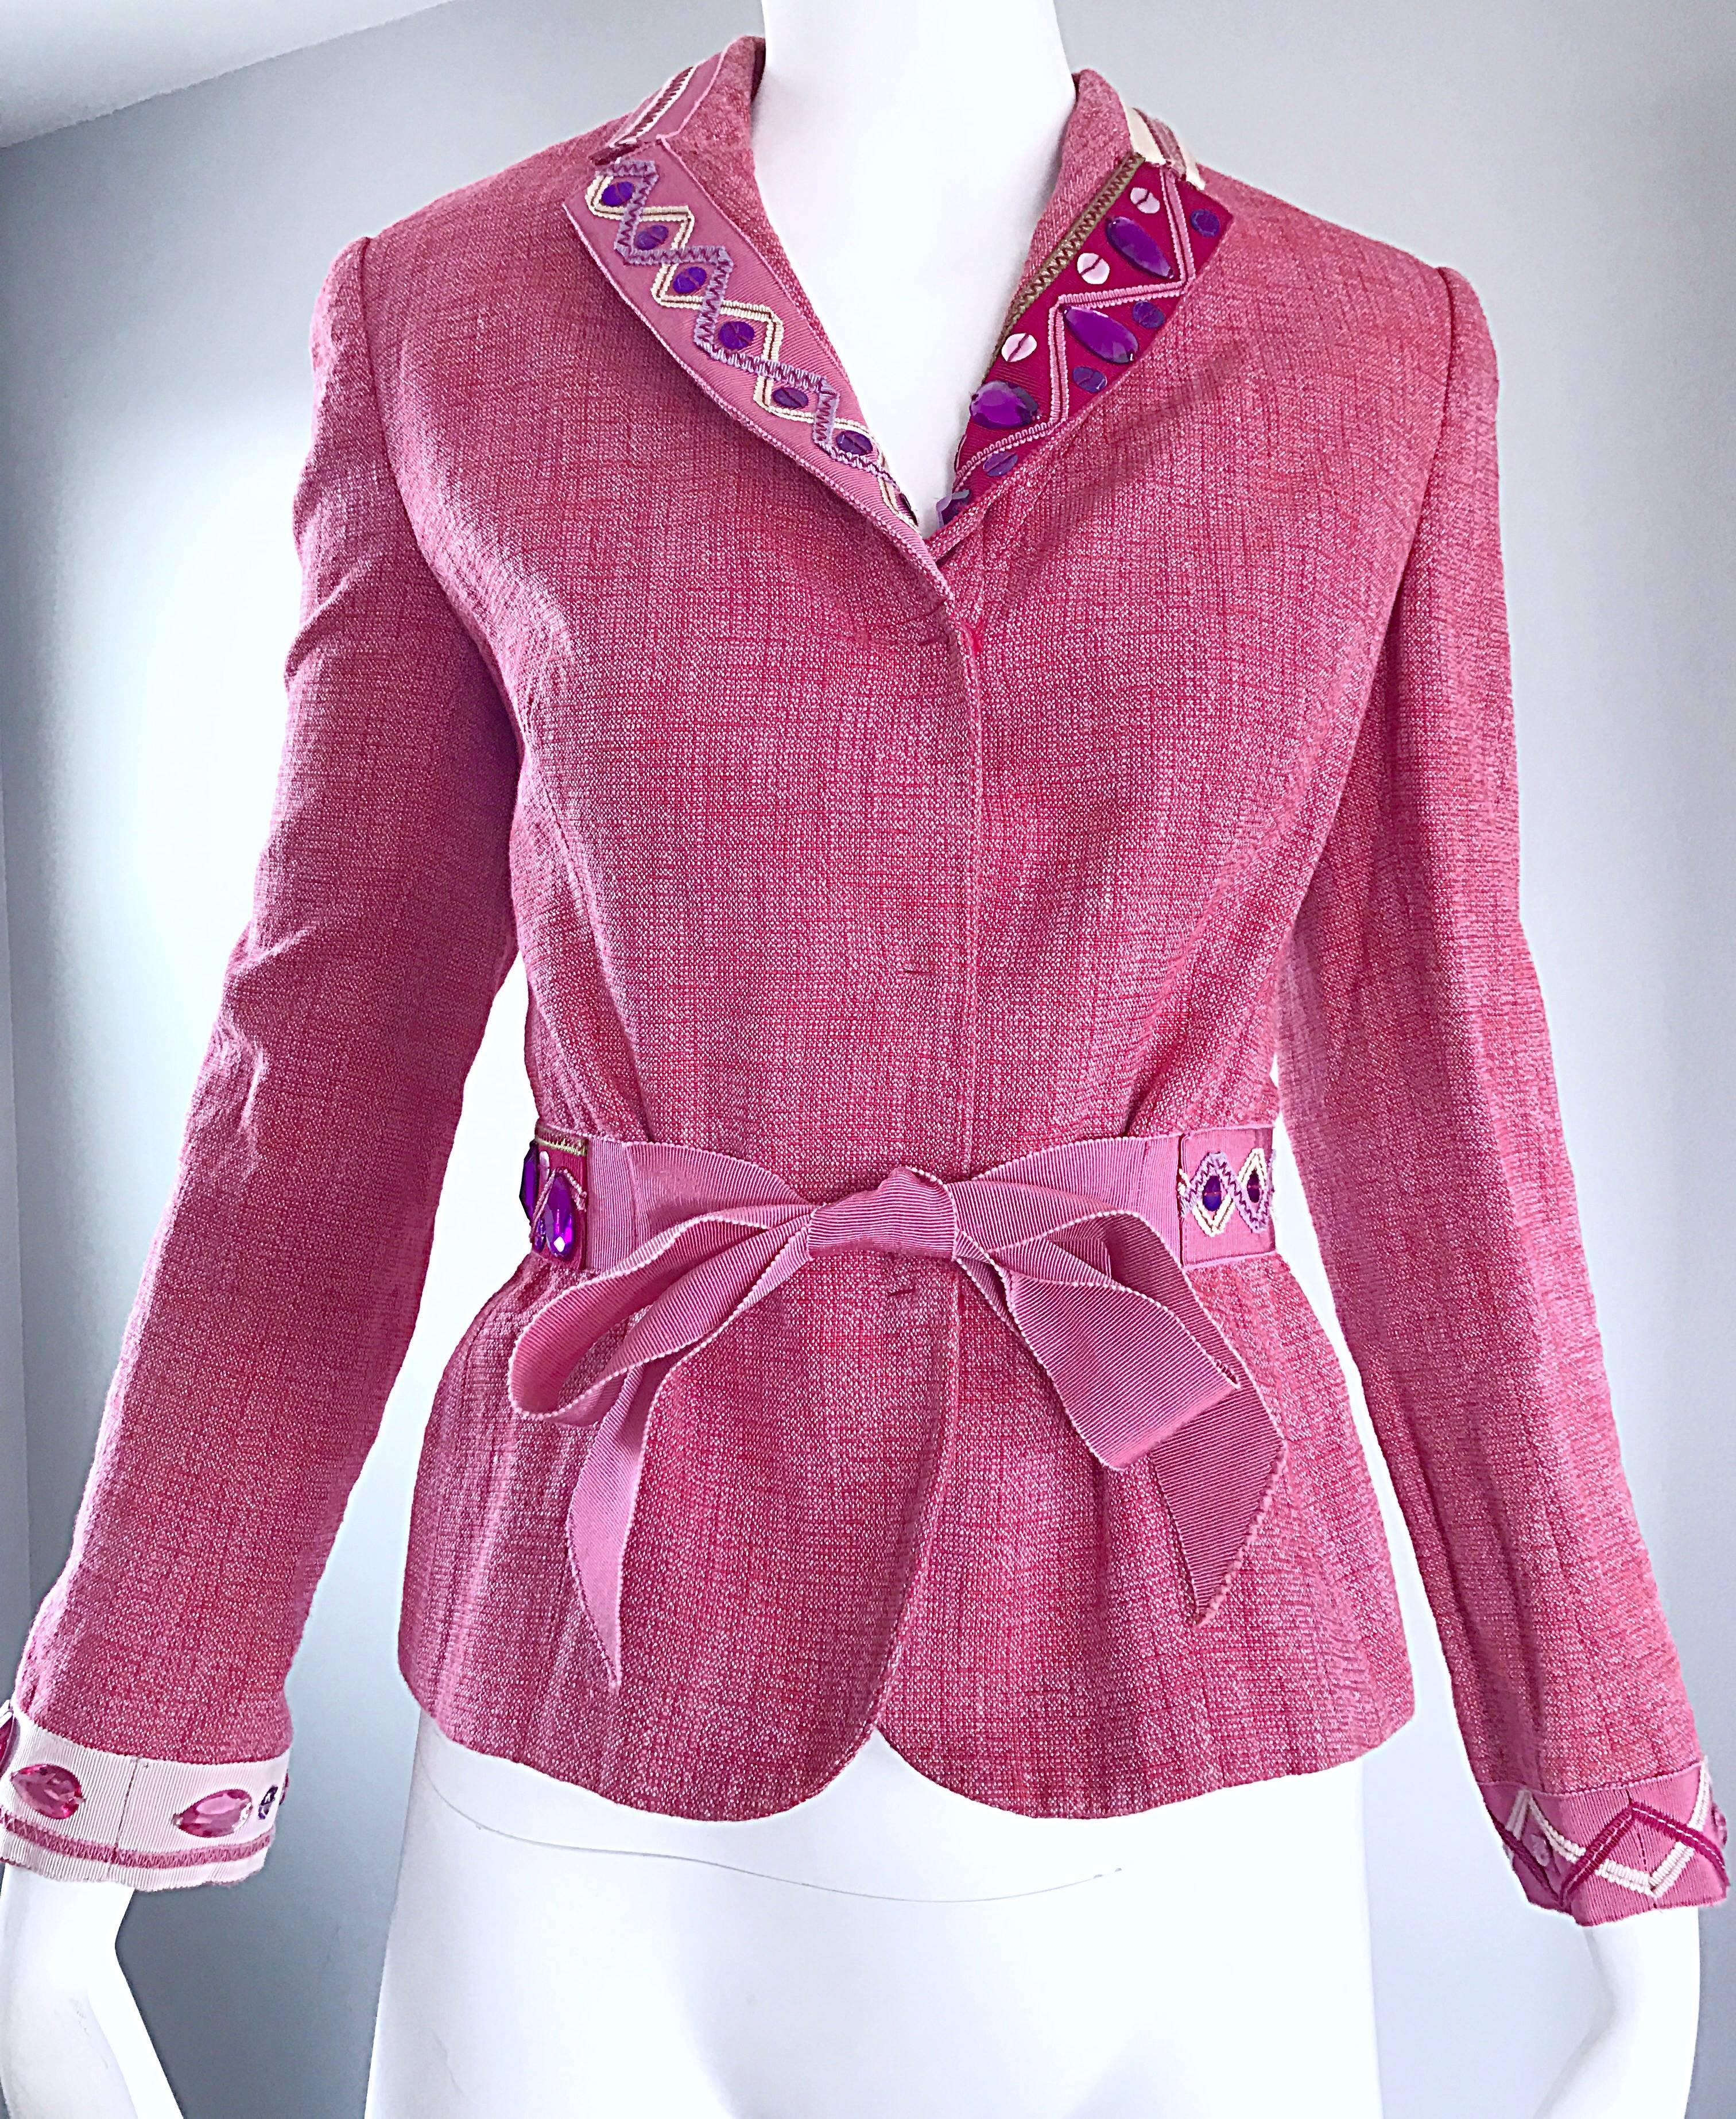 Vintage Moschino Cheap & Chic 1990s Size 12 Pink Beaded Belted Blazer Jacket For Sale 3